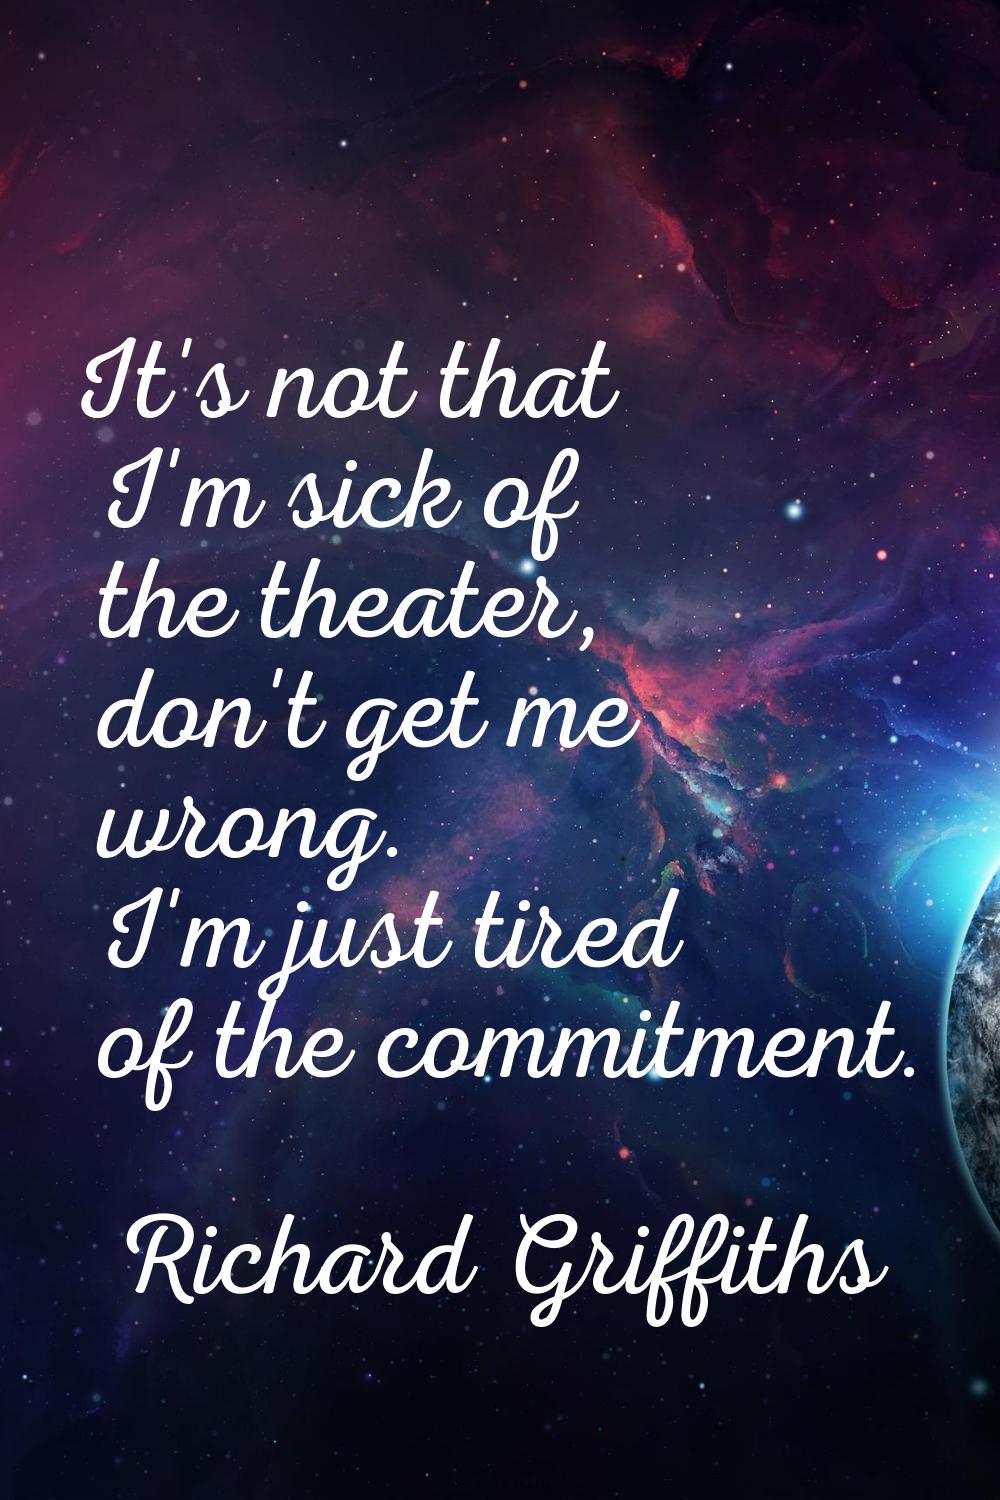 It's not that I'm sick of the theater, don't get me wrong. I'm just tired of the commitment.